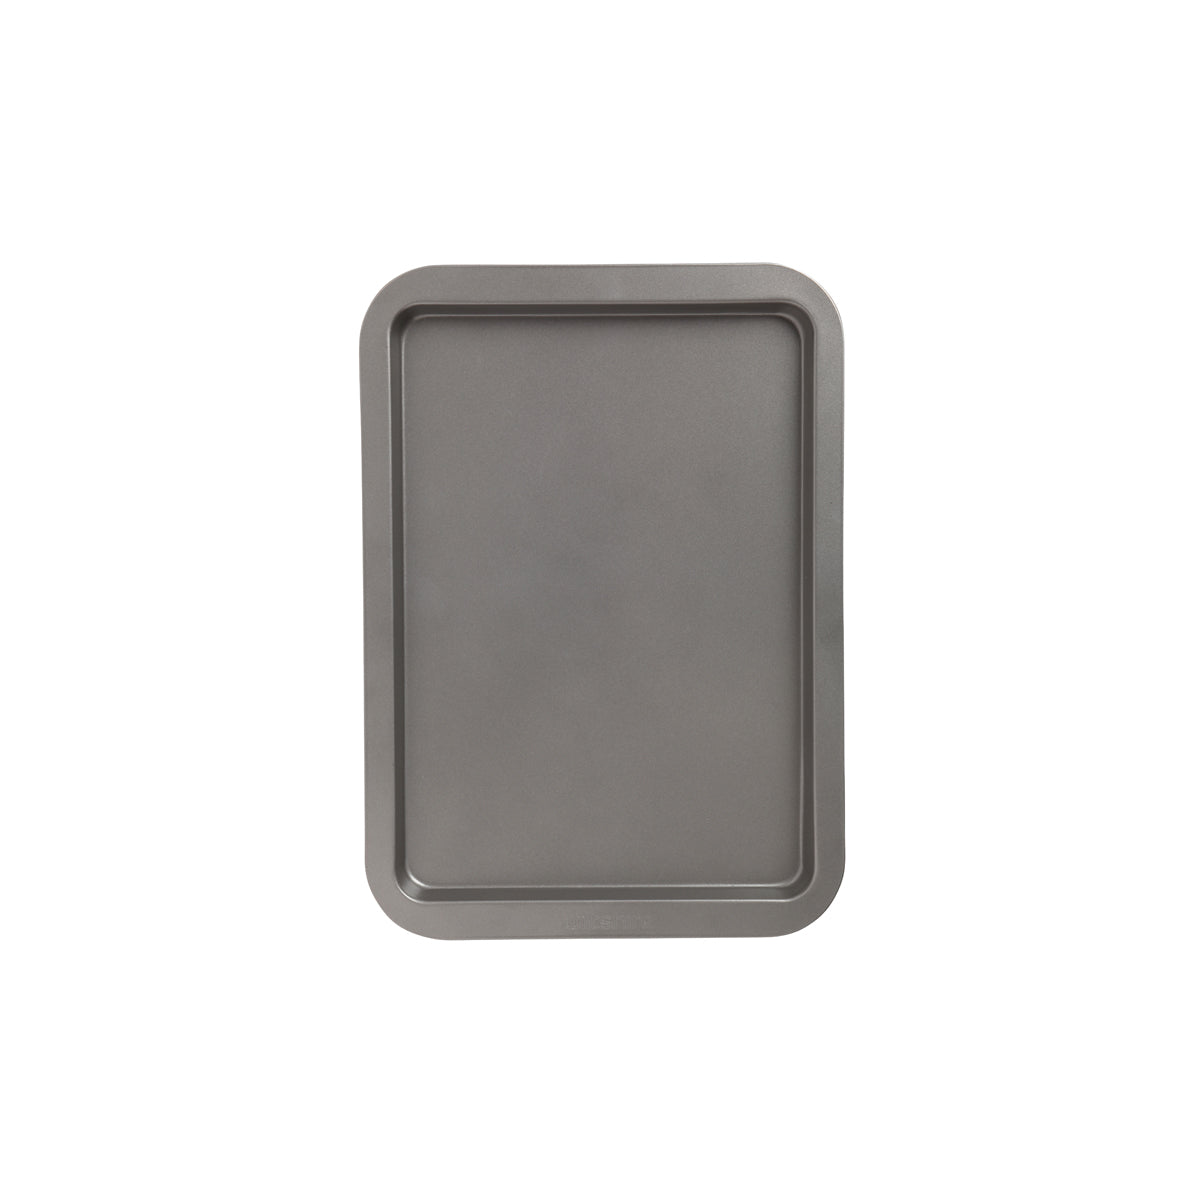 WLT40437 Wiltshire Two Toned Cookie Sheet 330x240mm Tomkin Australia Hospitality Supplies